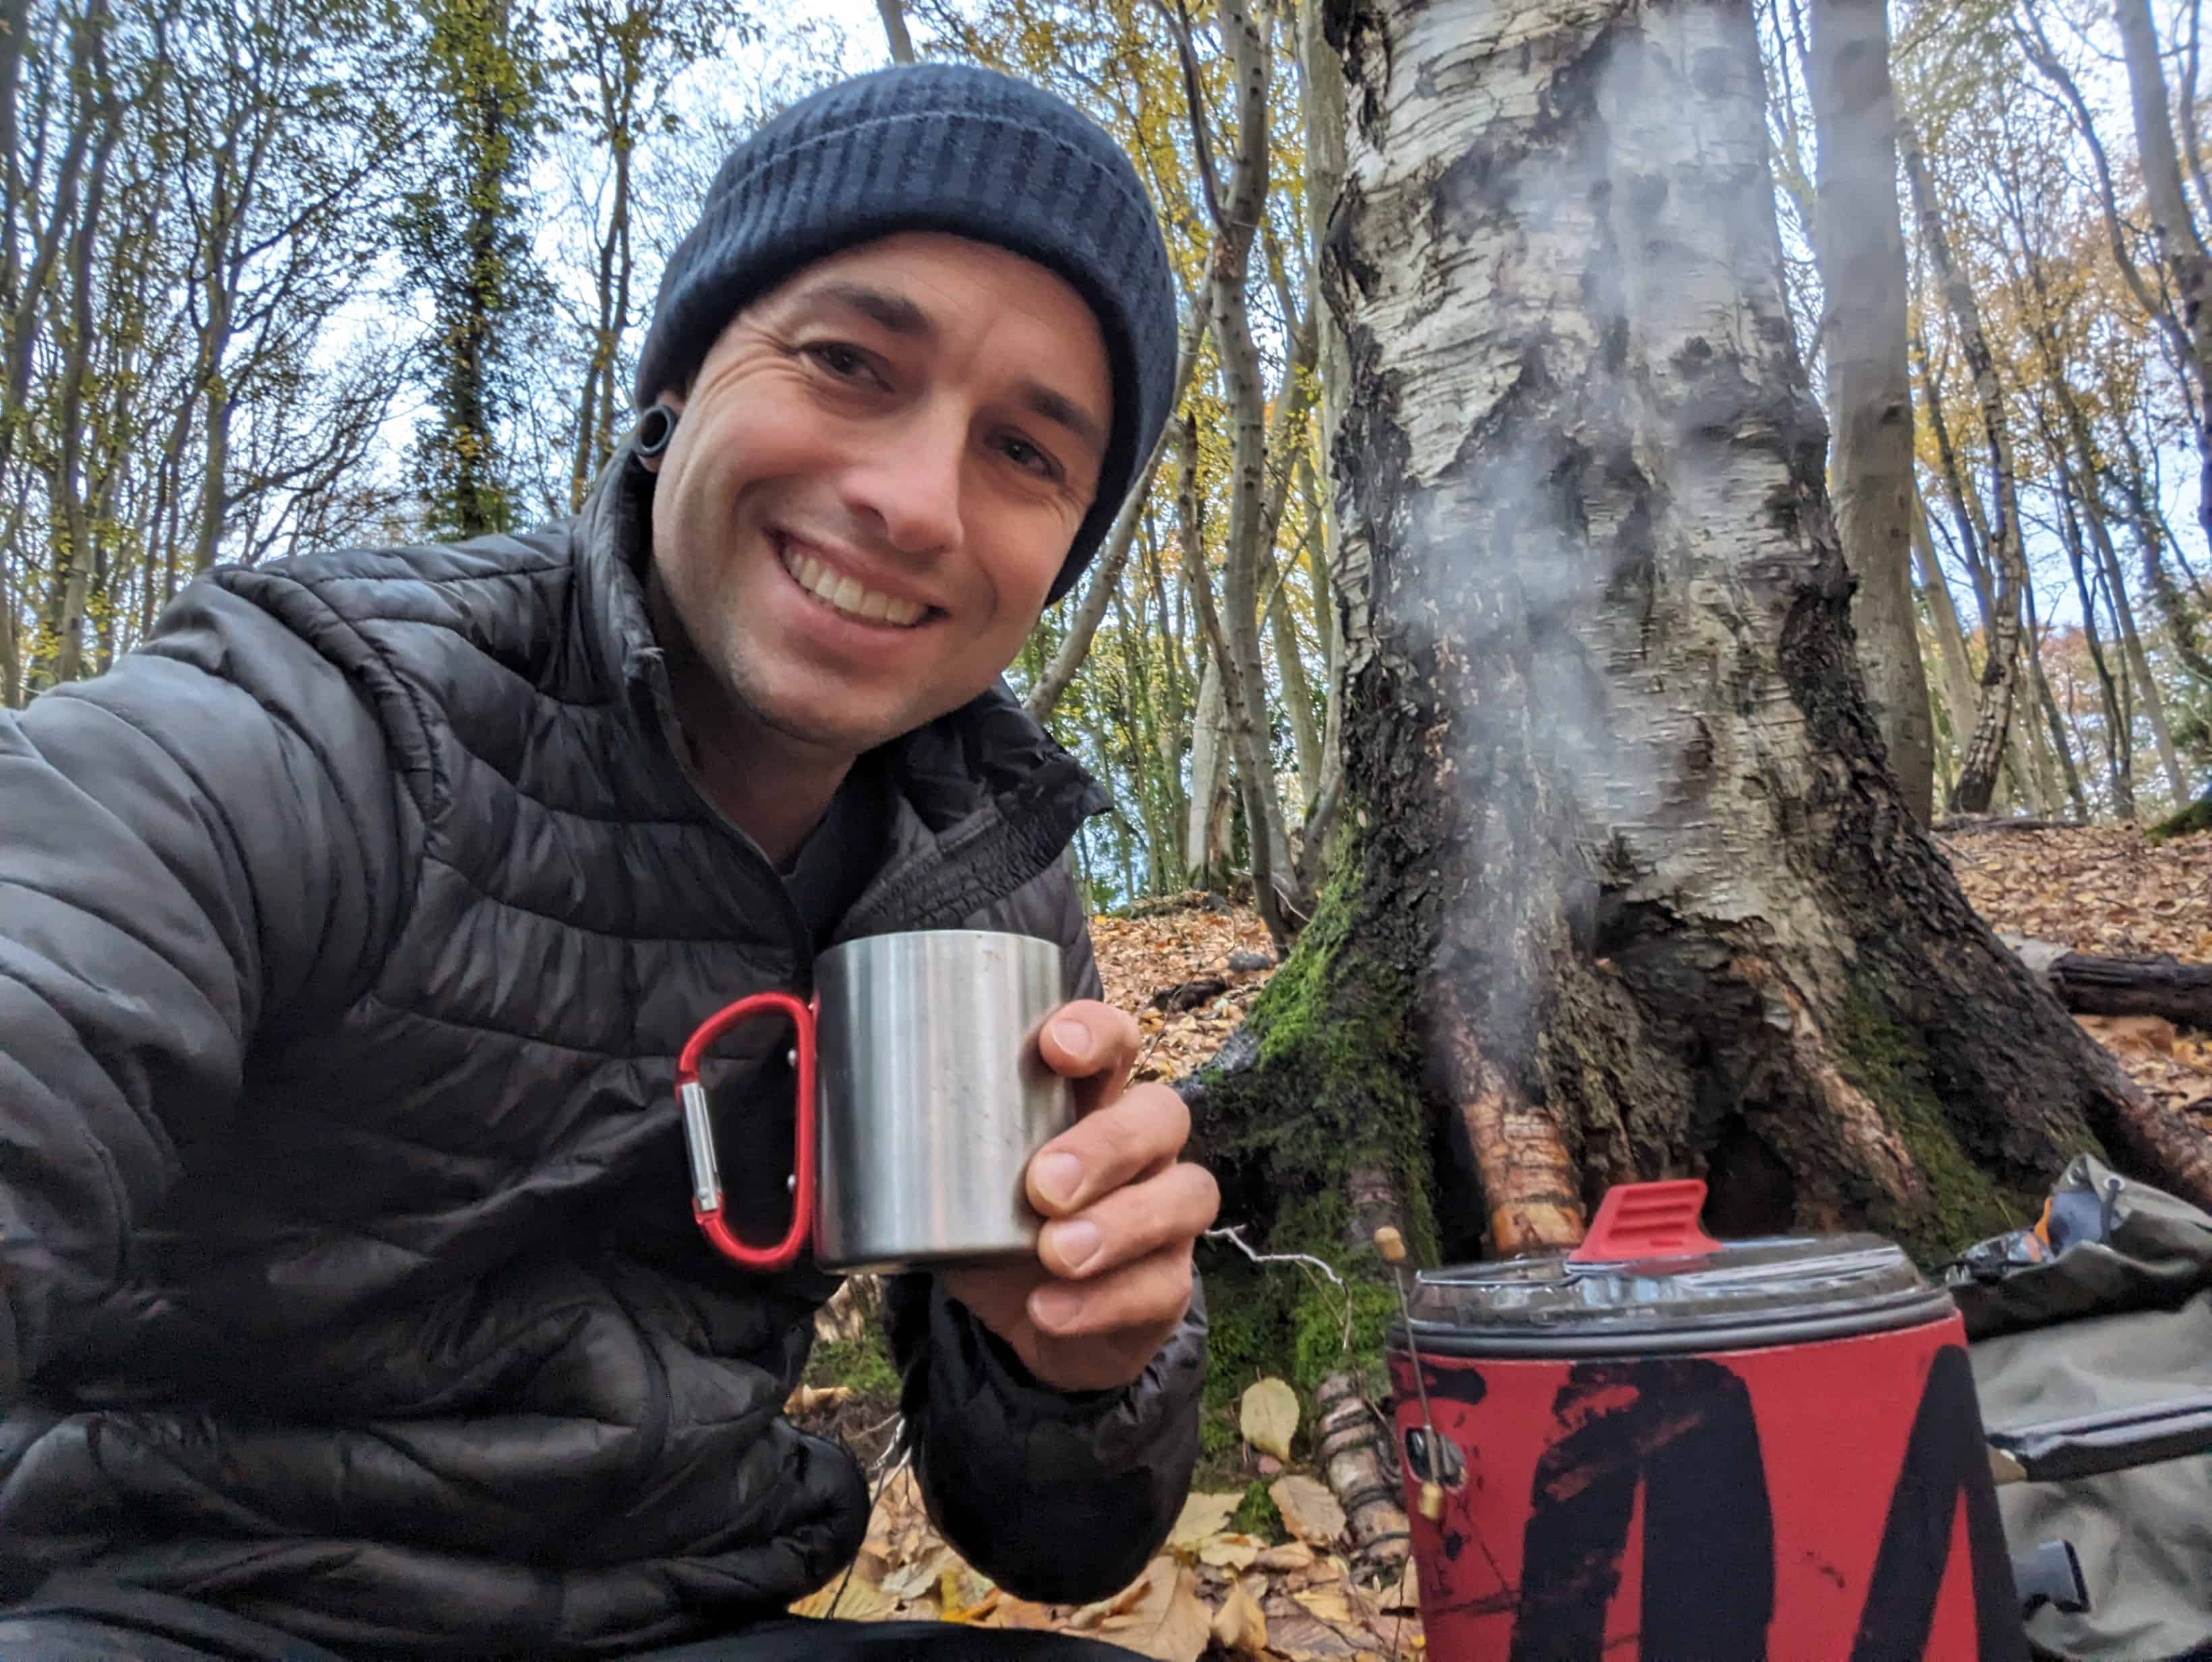 Quick cup of coffee on the trail